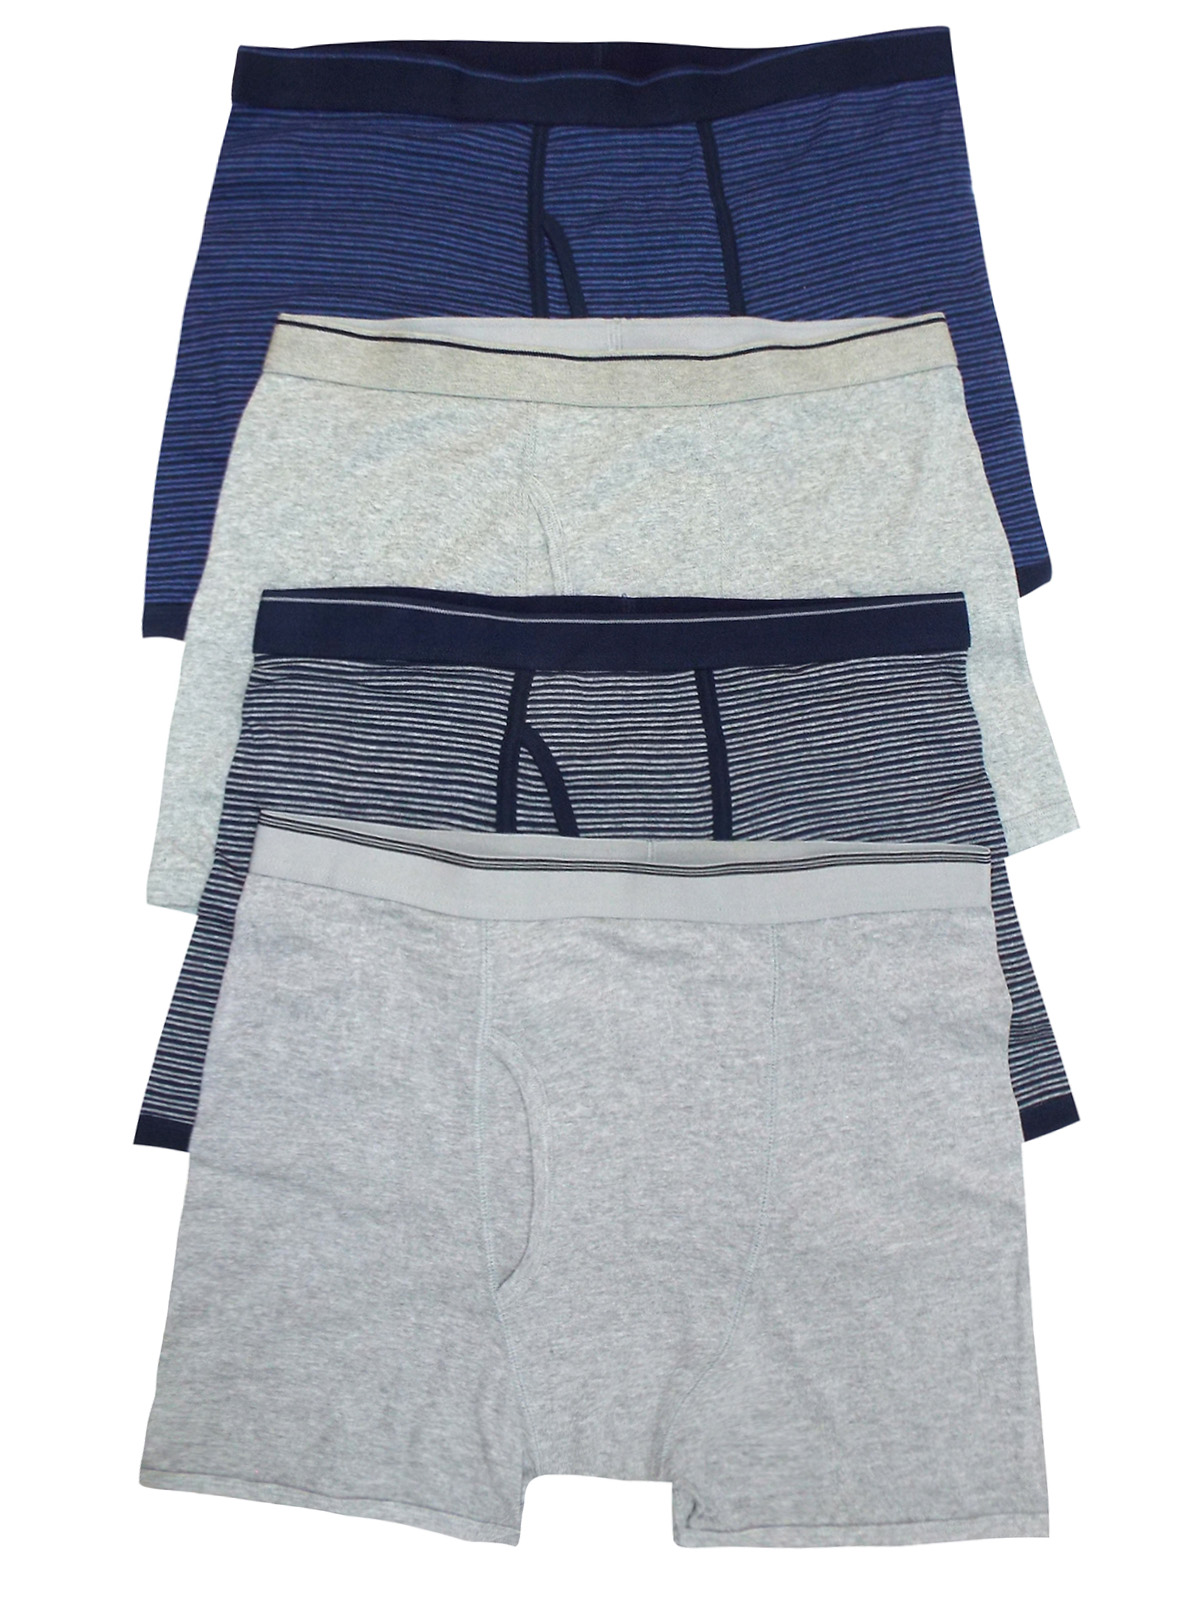 Marks and Spencer - - M&5 ASSORTED Mens Pure Cotton Boxers - Size M to 2XL